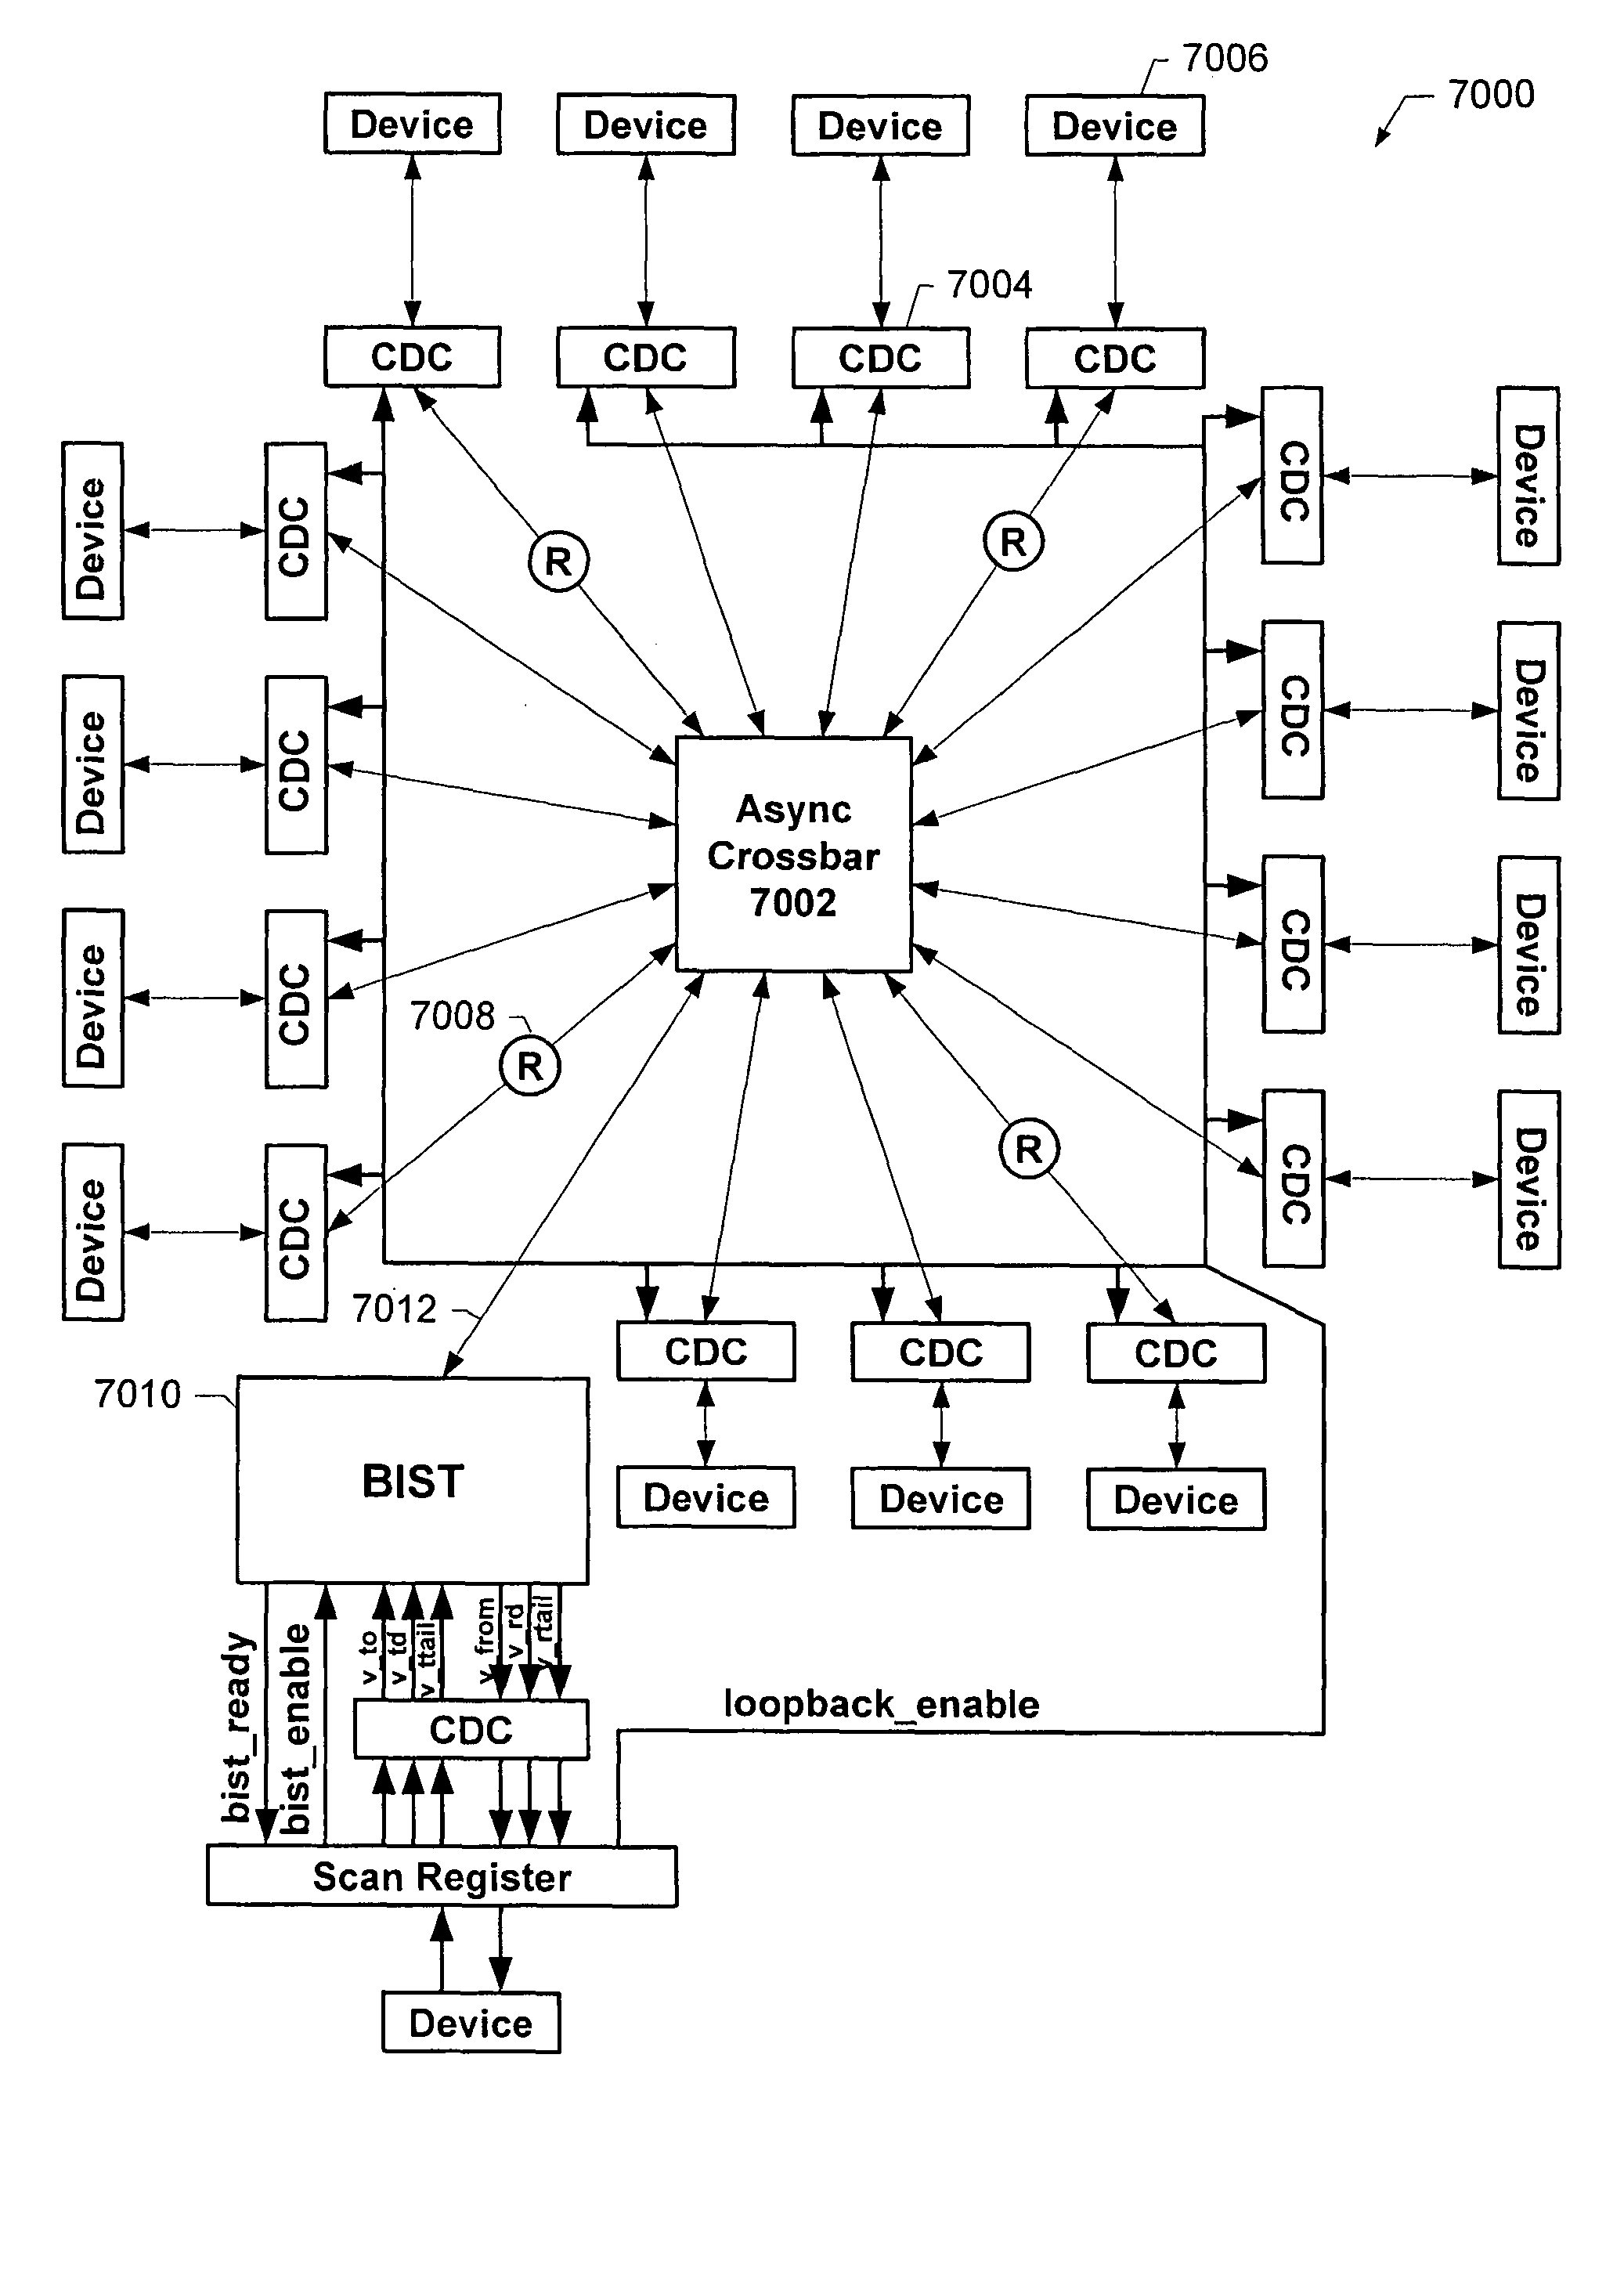 Asynchronous system-on-a-chip interconnect